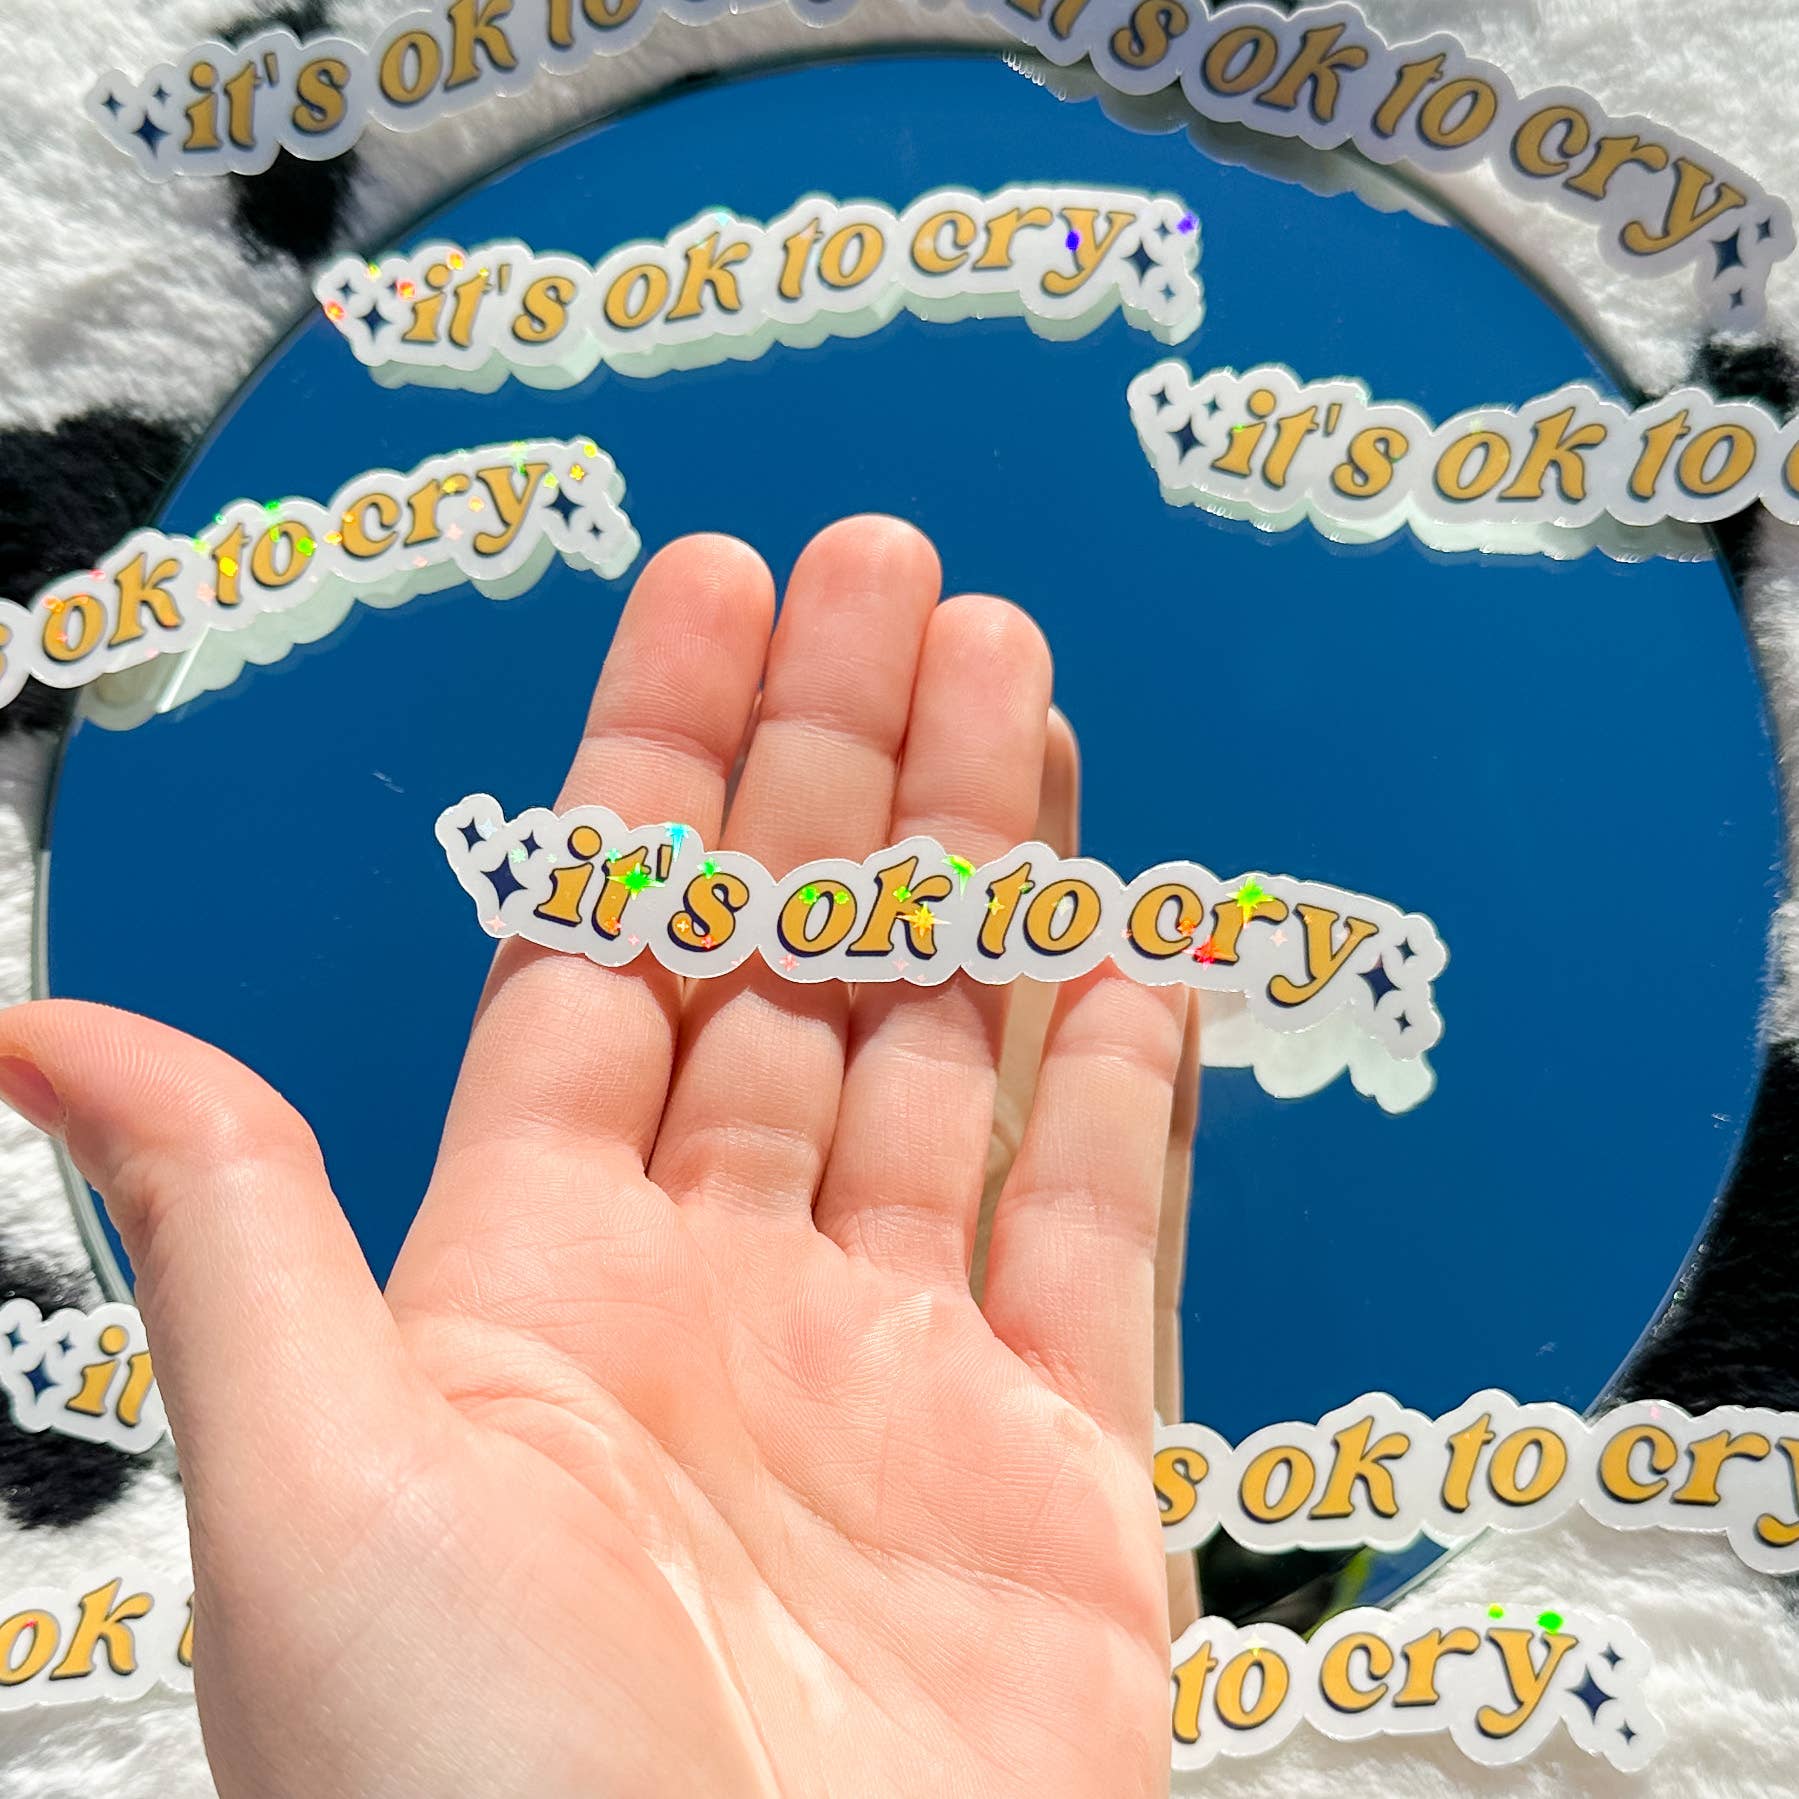 "It's Ok To Cry" Holographic Sticker